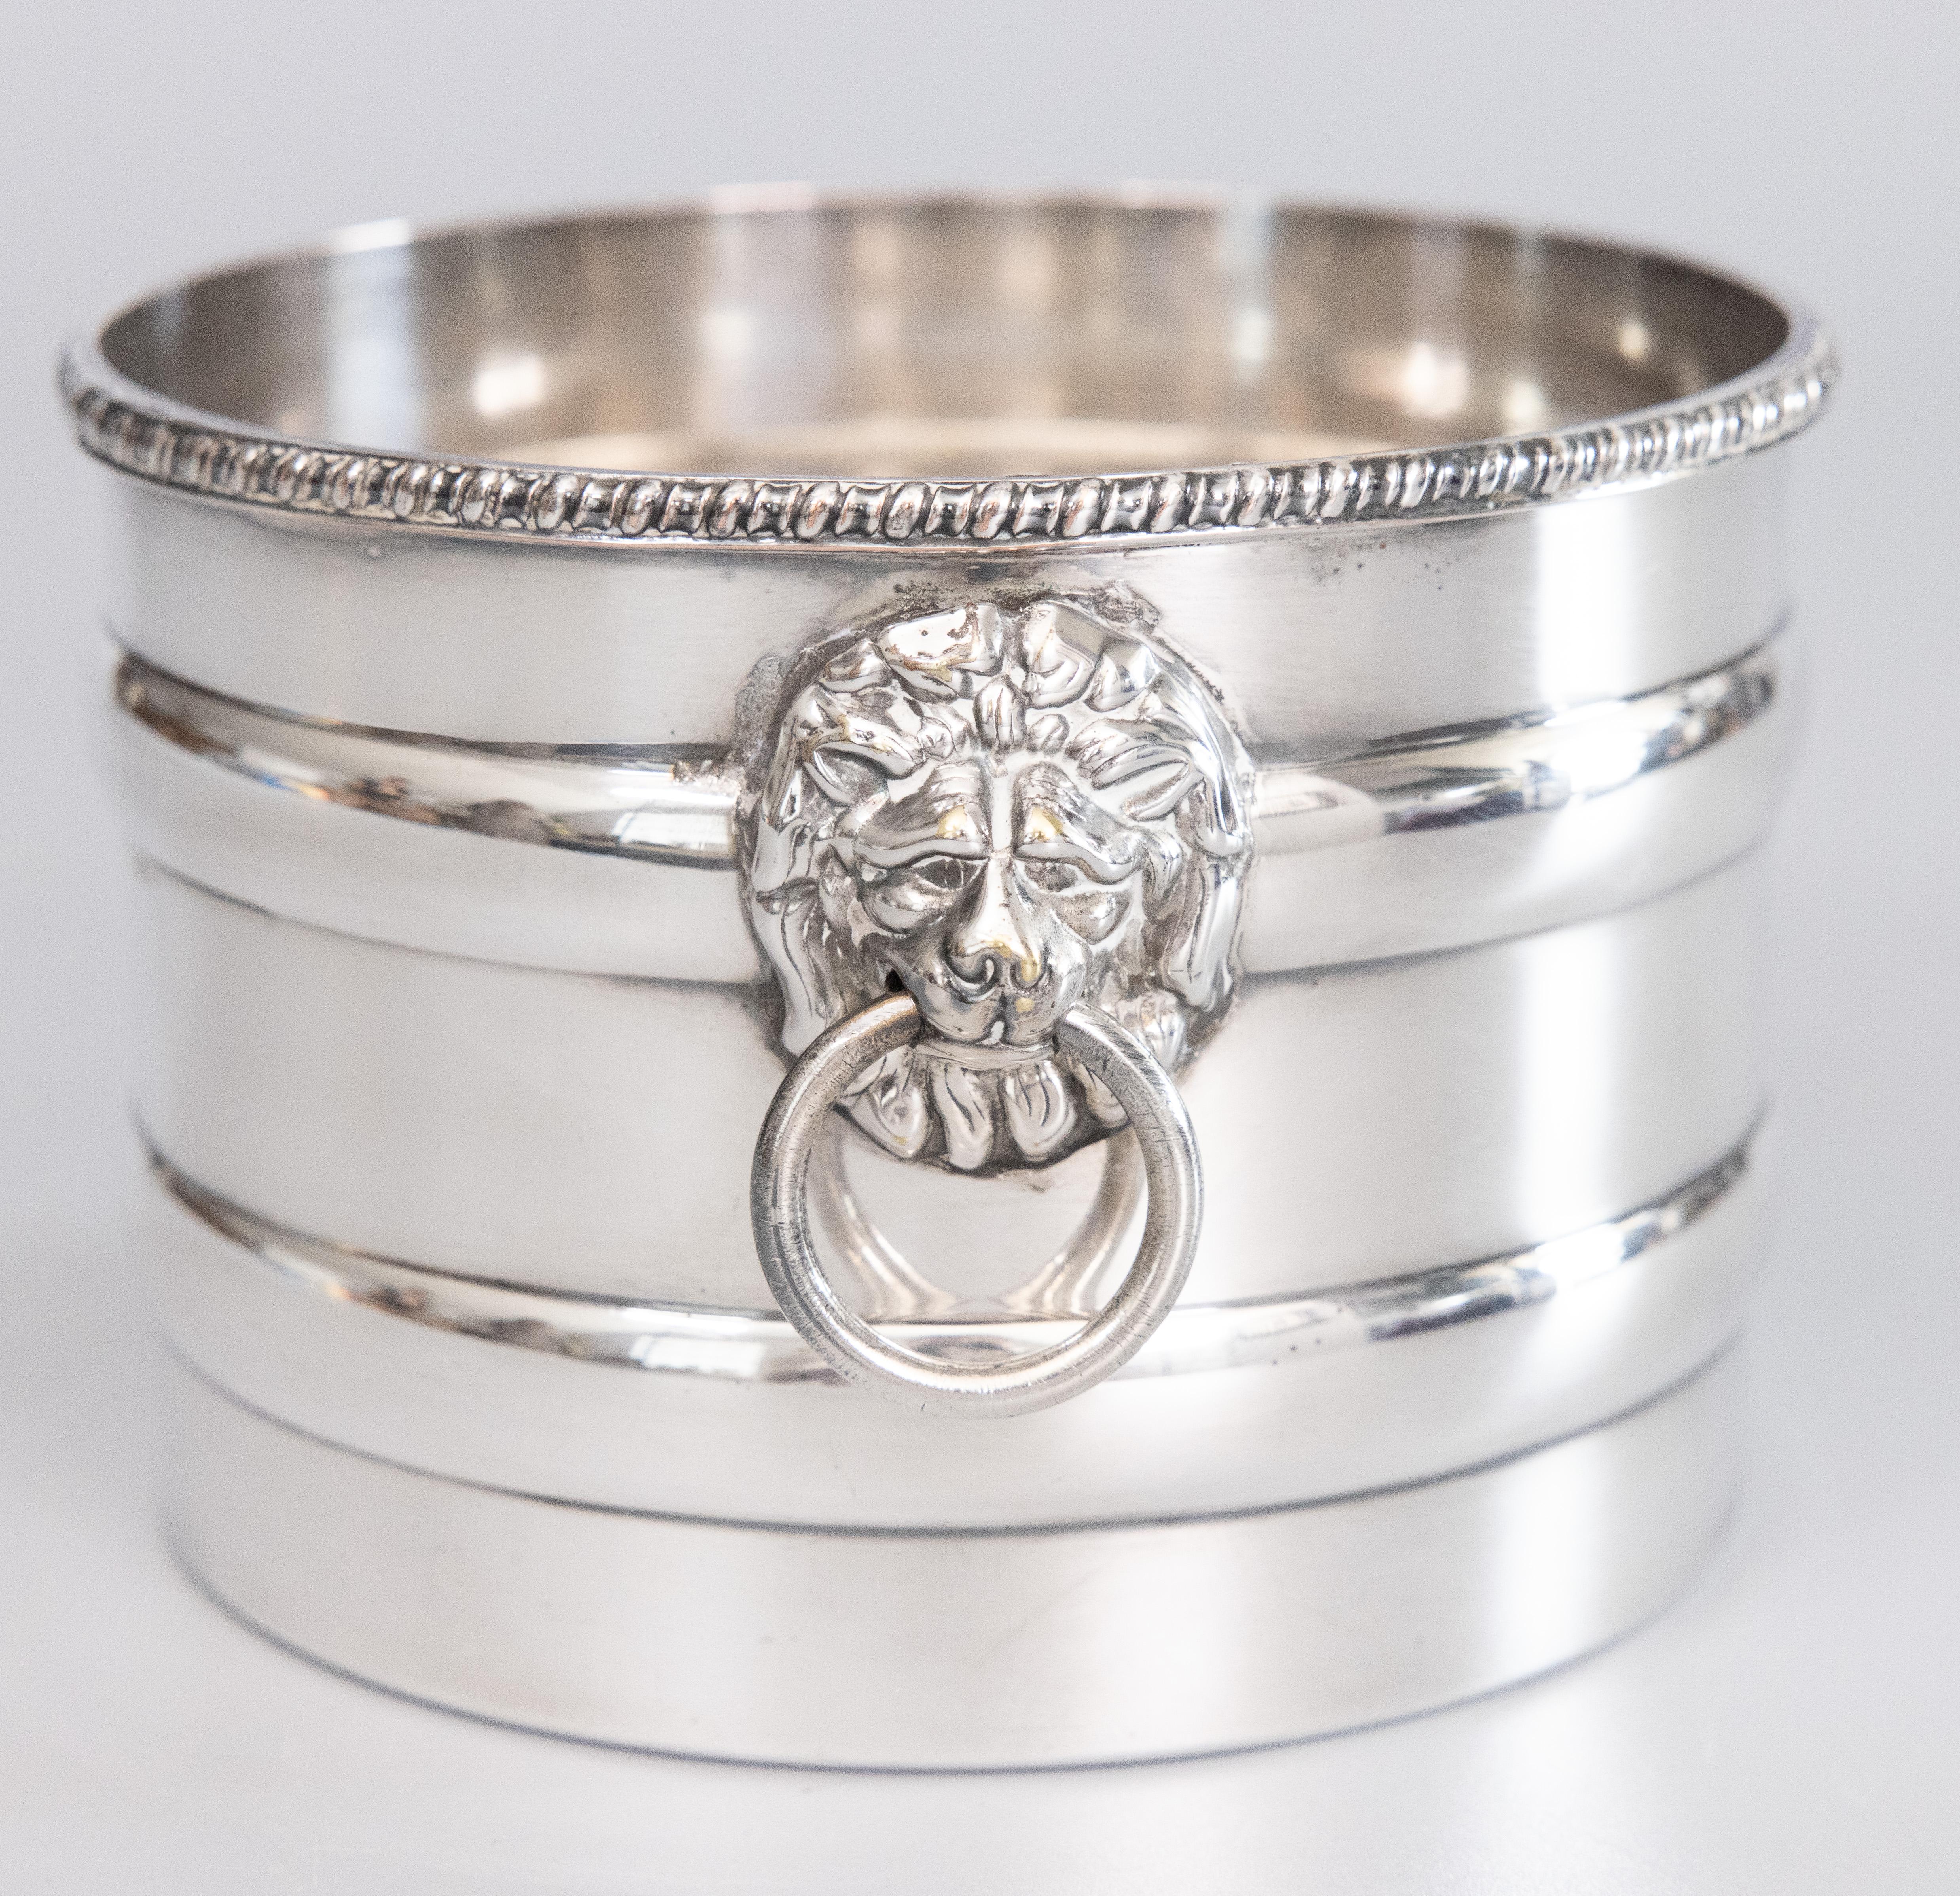 A lovely vintage mid-century English Sheffield Georgian style petite silverplate wine coaster or petite ice bucket with lion head ring handles. This fine quality ice bucket has exquisite details in the lion heads and decorative trim. It's the